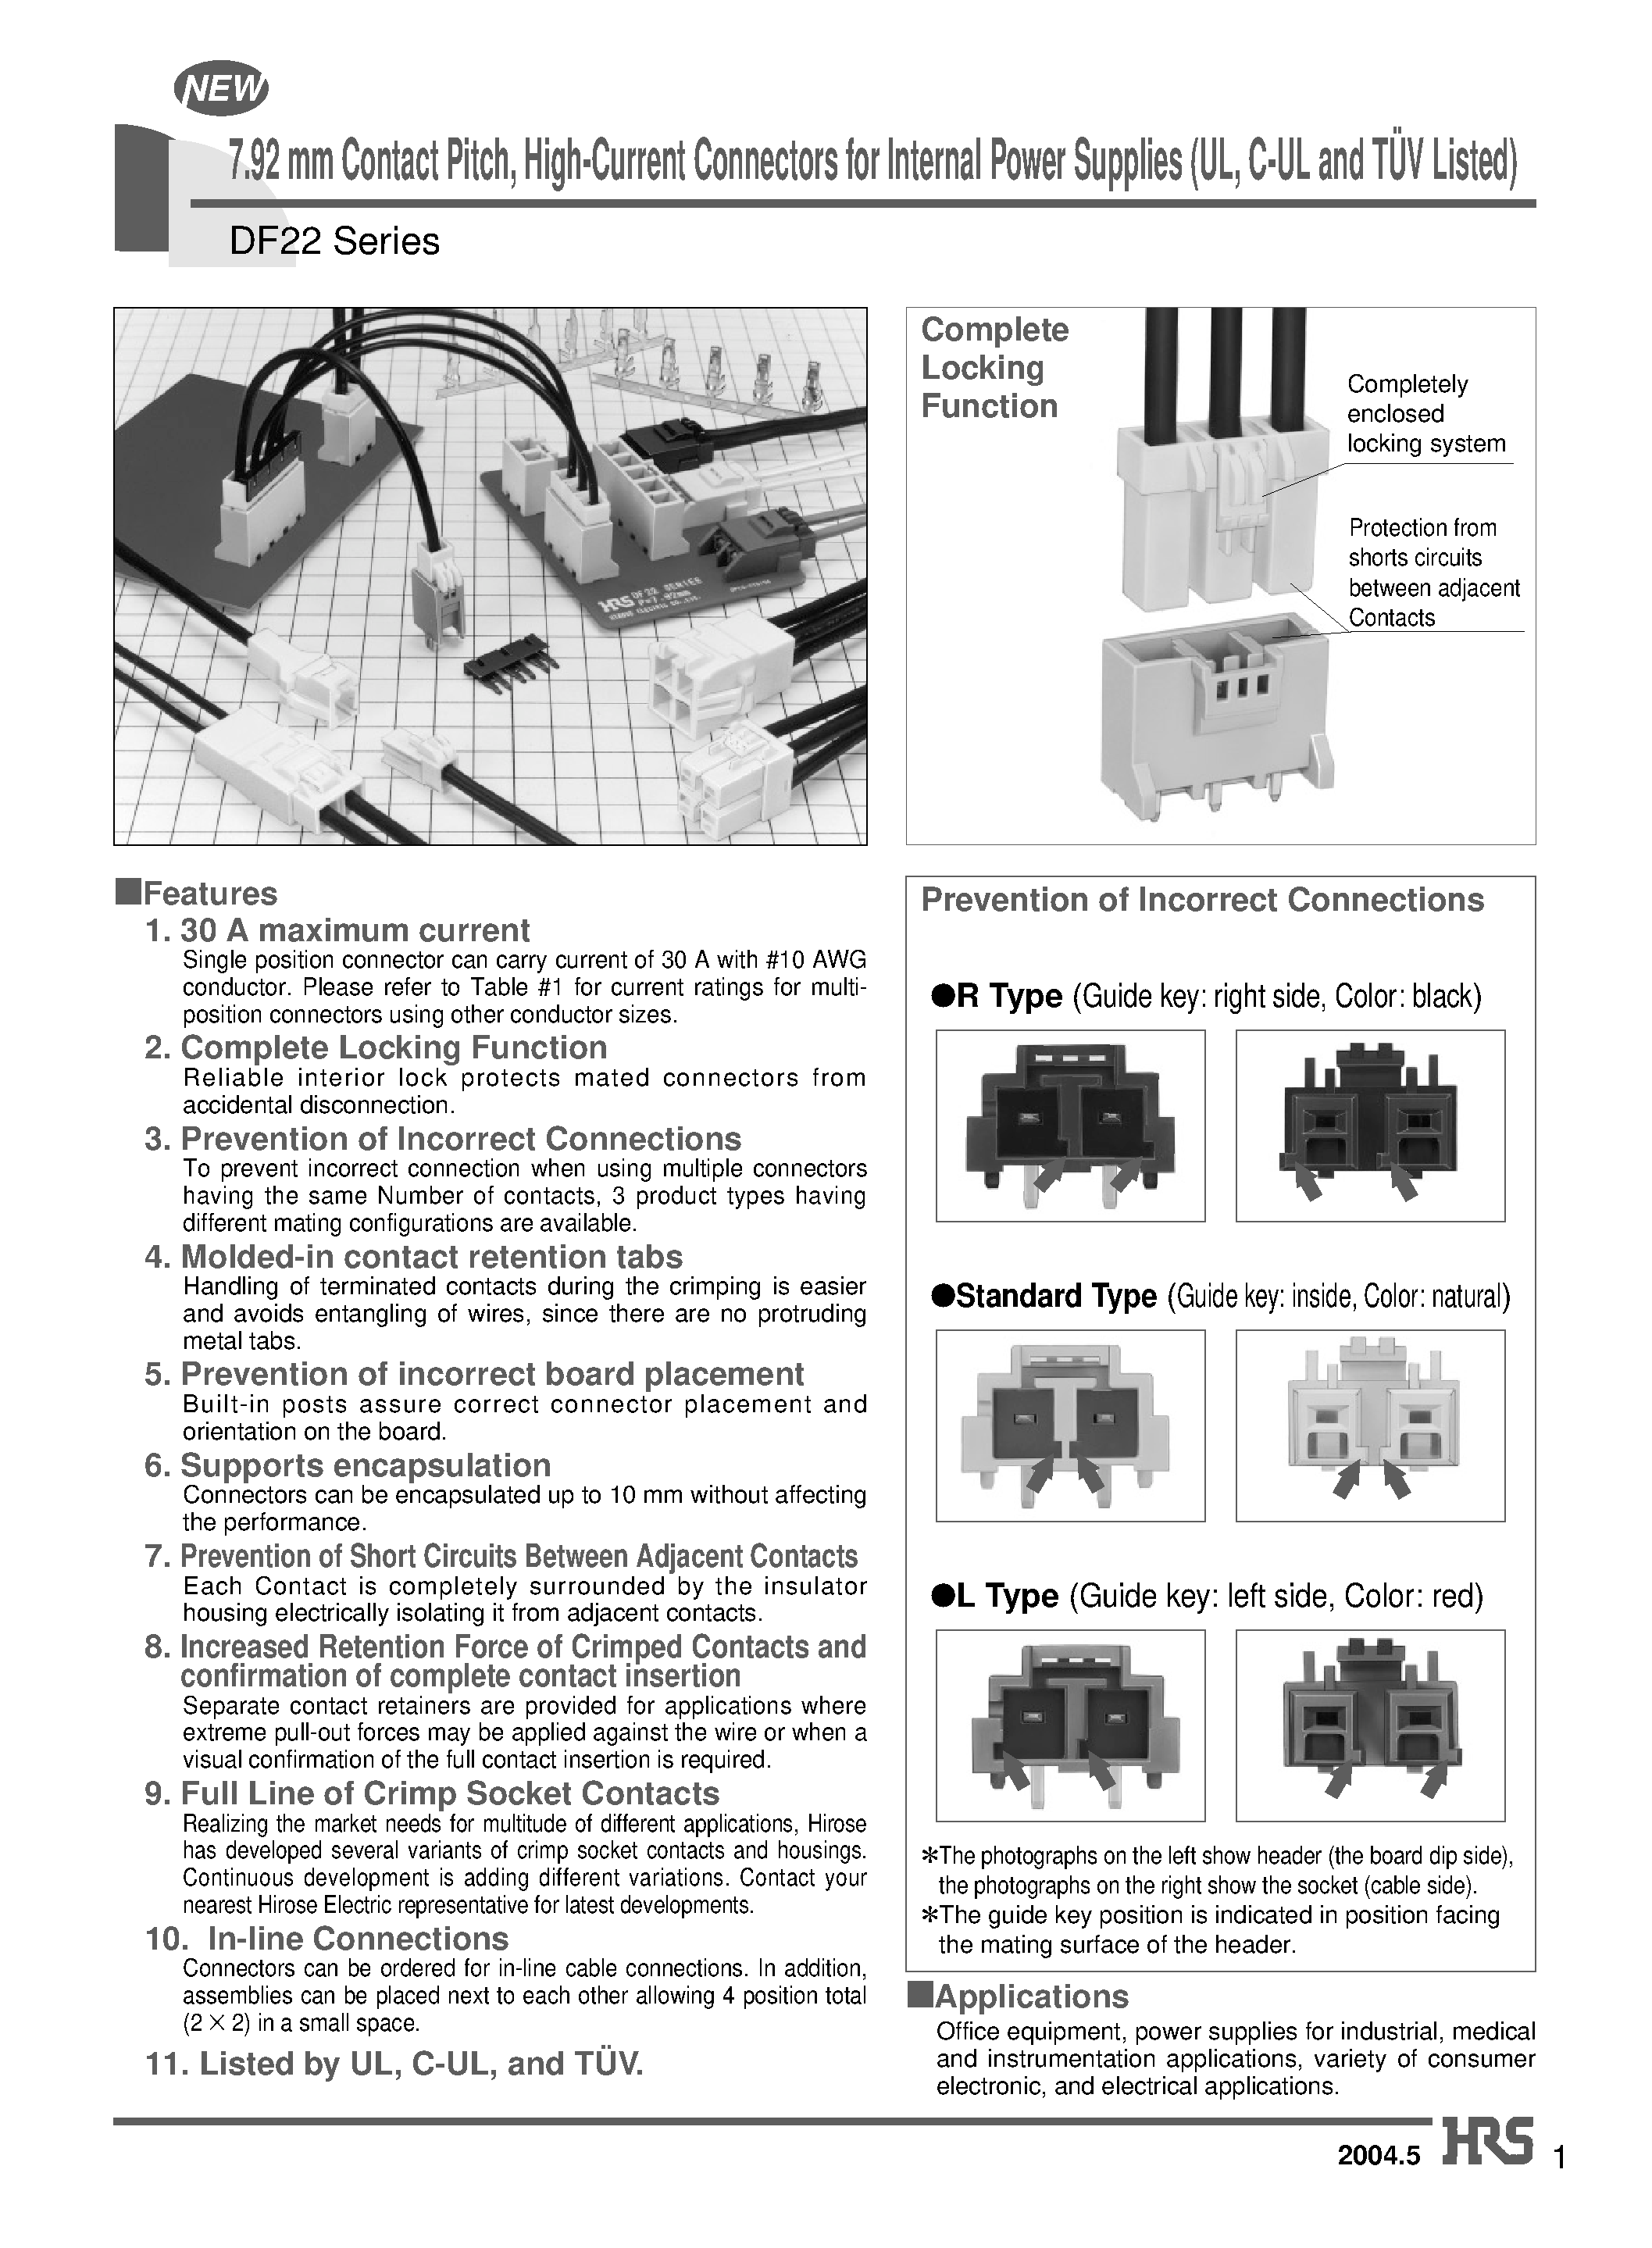 Даташит DF22A-4EP-7.92C - 7.92 mm Contact Pitch/ High-Current Connectors for Internal Power Supplies (UL/ C-UL and TUV Listed) страница 1